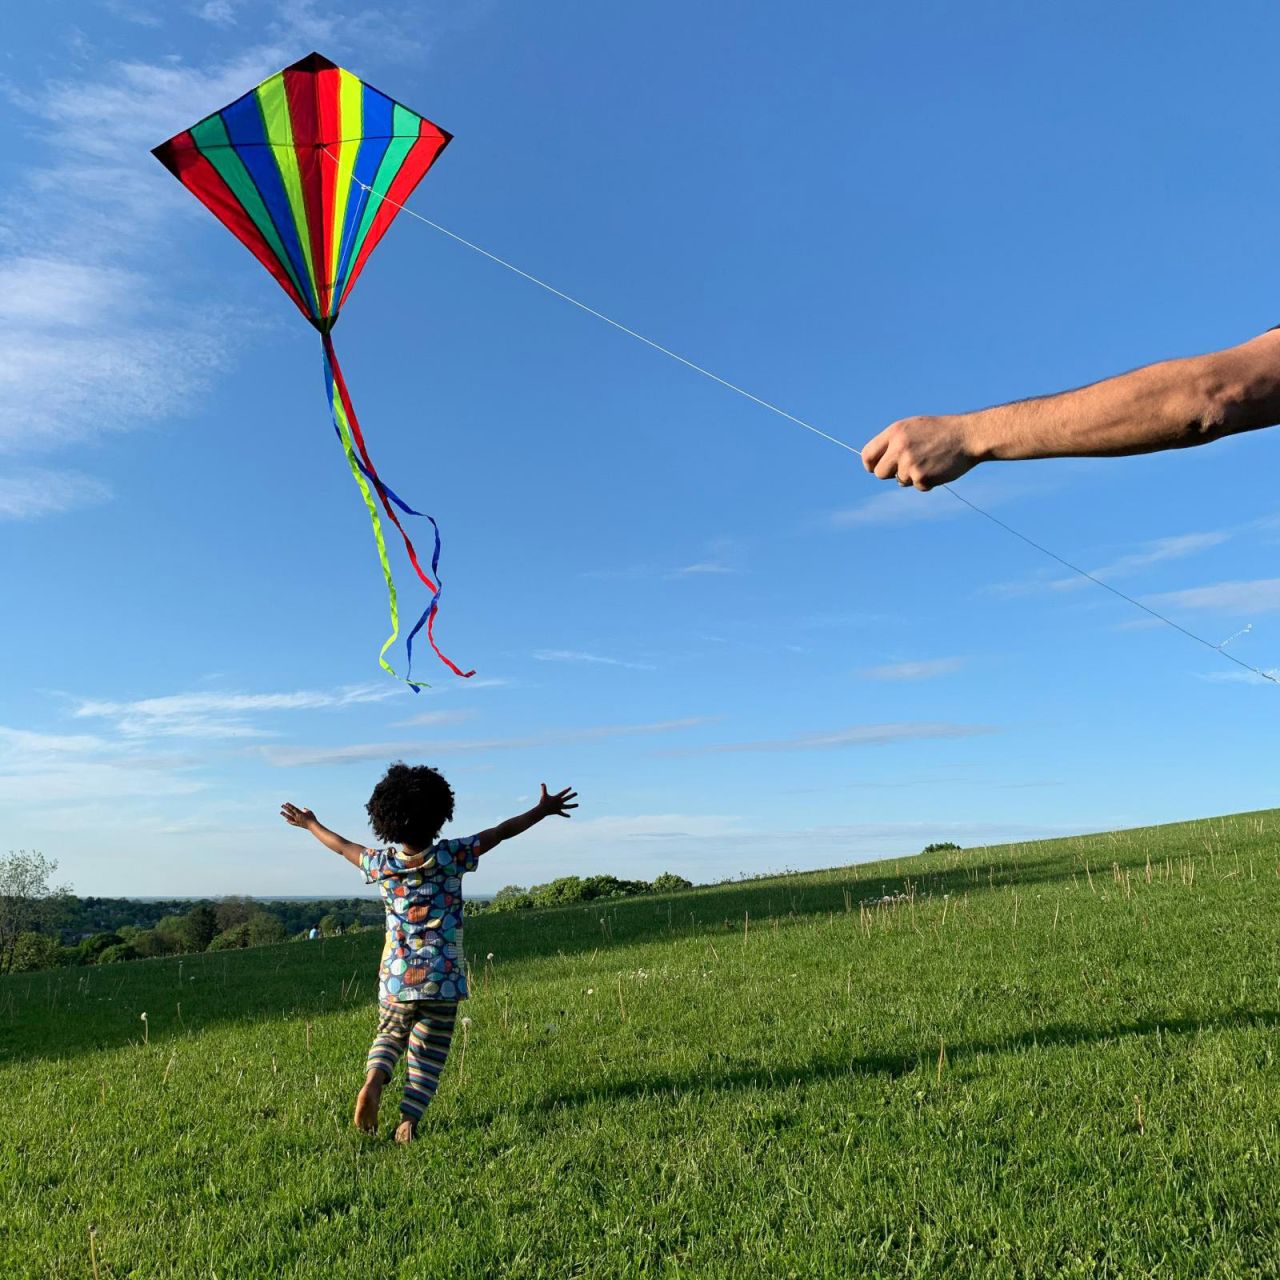 <a href="http://www.amytoensing.com/" target="_blank" target="_blank">Amy Toensing</a> photographed her daughter,  Elsa, chasing a kite flown by her husband. "We were fortunate enough to become a family through adoption," she said. "Being a mom challenges, fulfills and humbles me every day. My daughter has opened my world and makes me want to know more about myself so I can be more present with her. She is the love of my life."